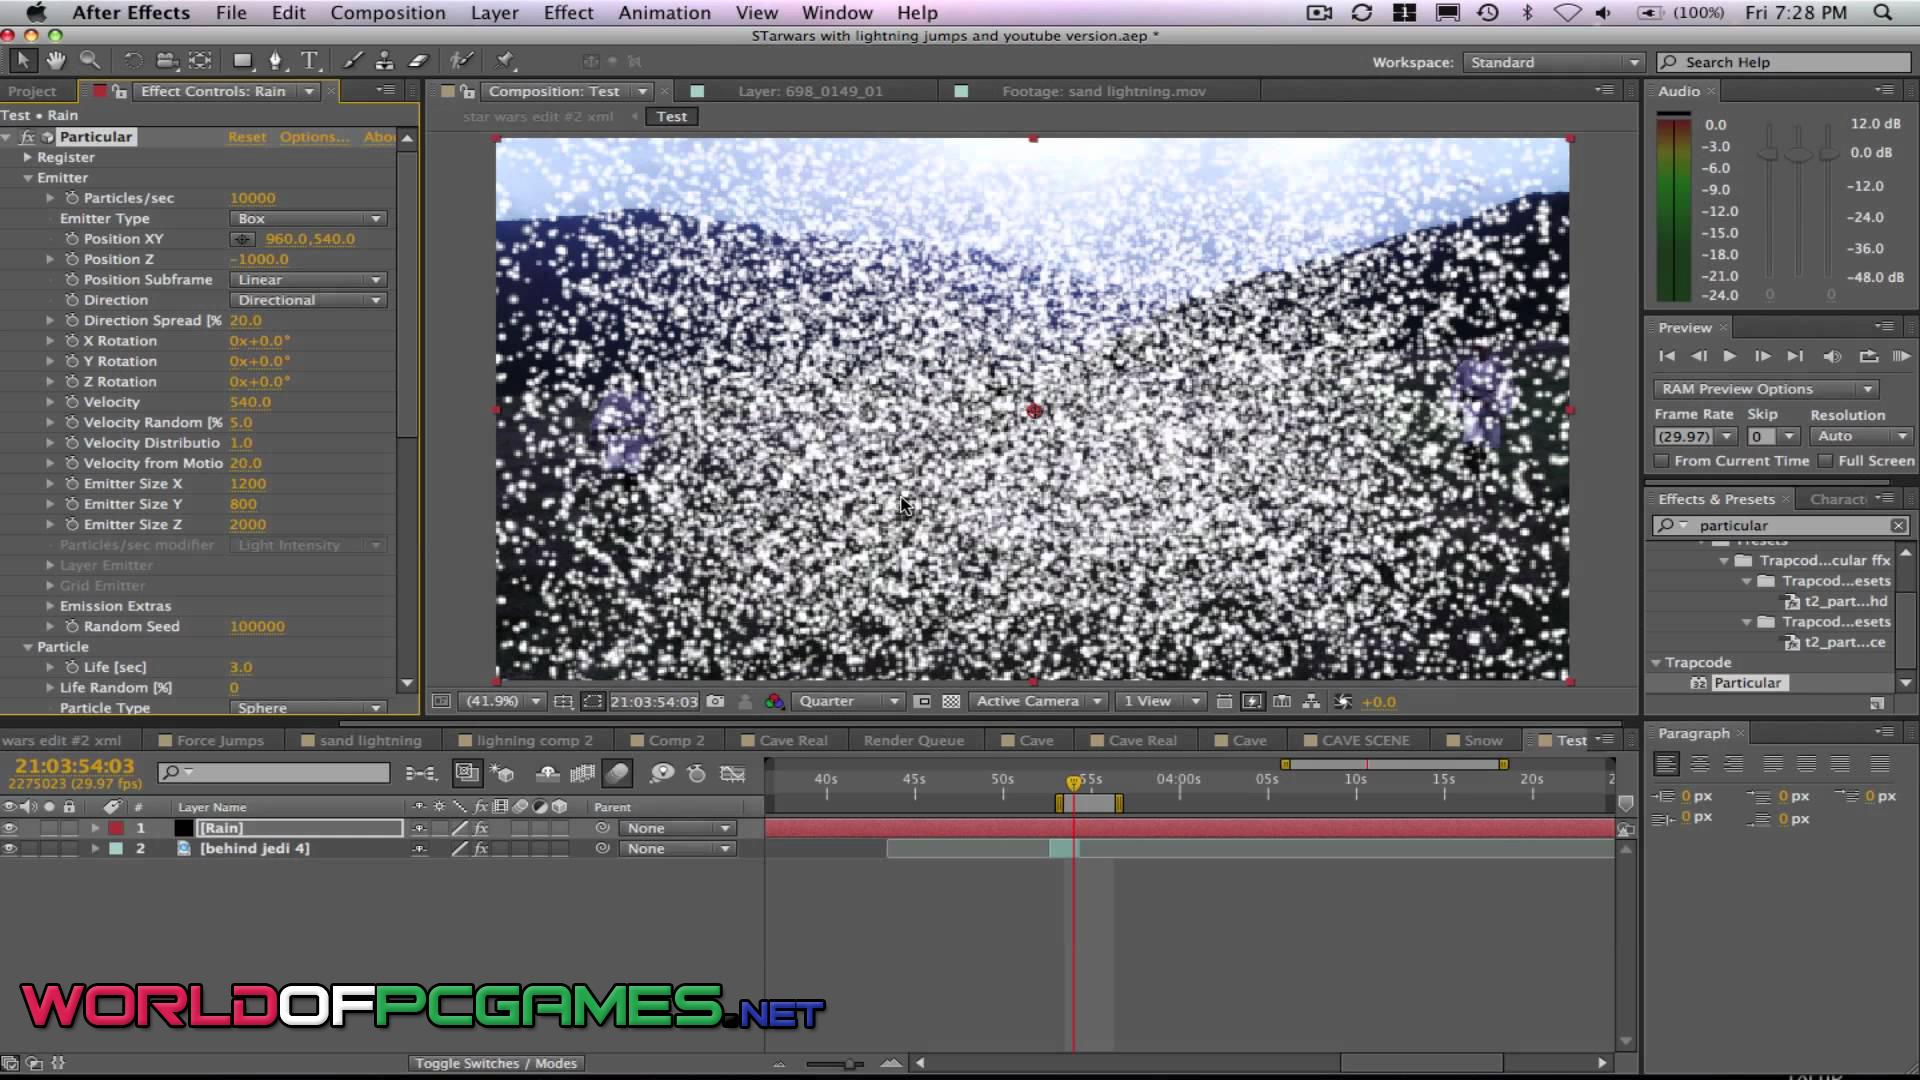 Adobe After Effects CC 2018 Free Download By worldof-pcgames.netm